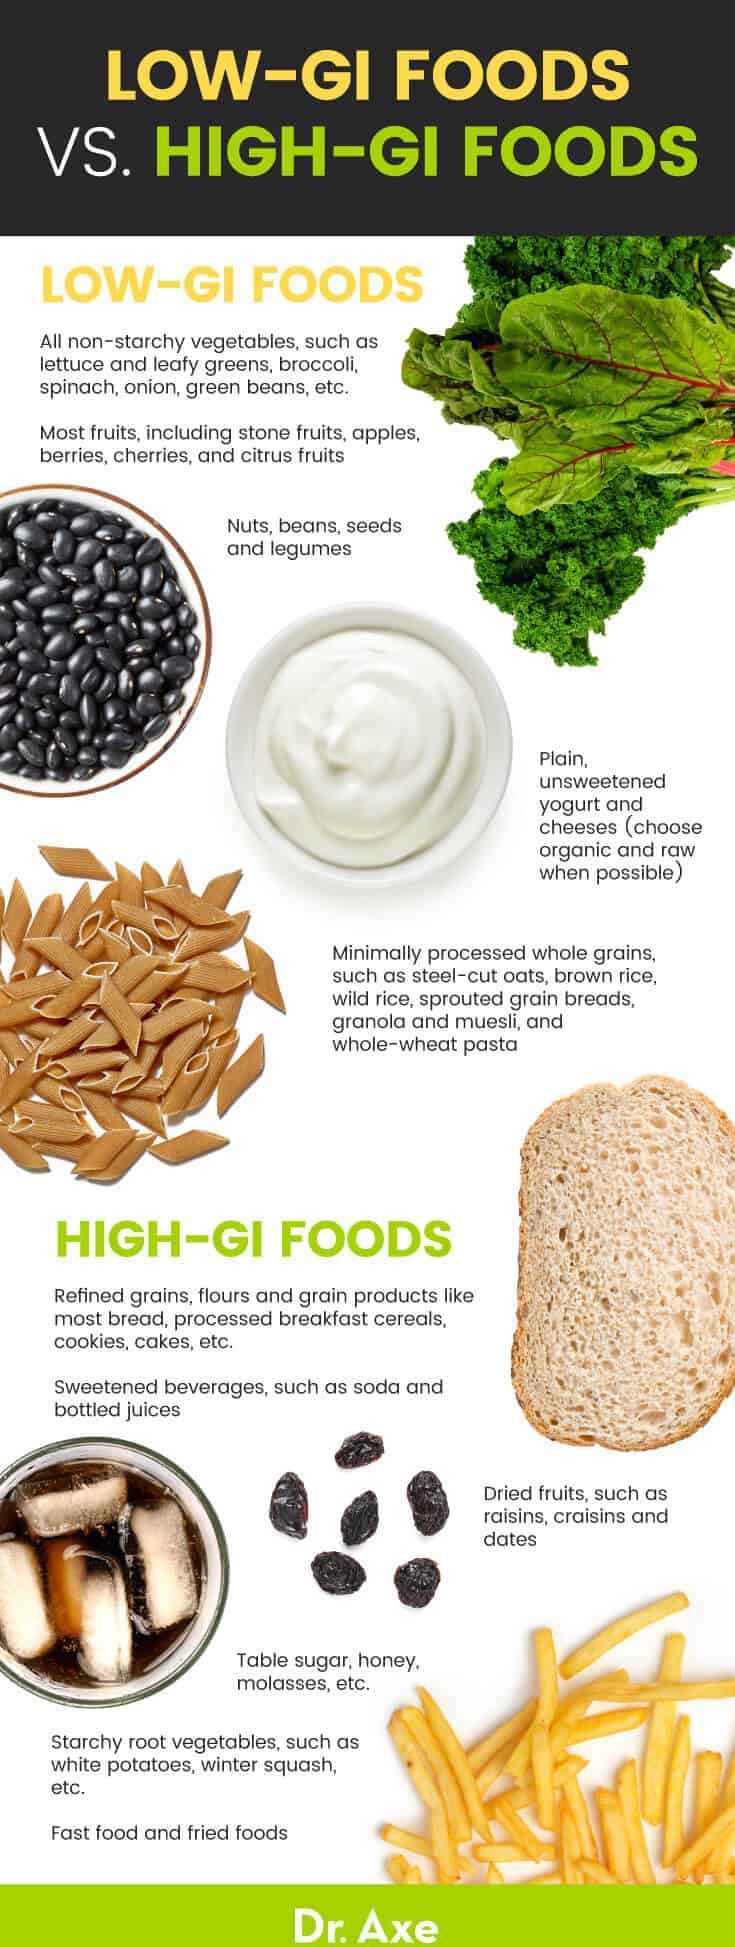 Low-glycemic foods vs. high-glycemic foods - Dr. Axe